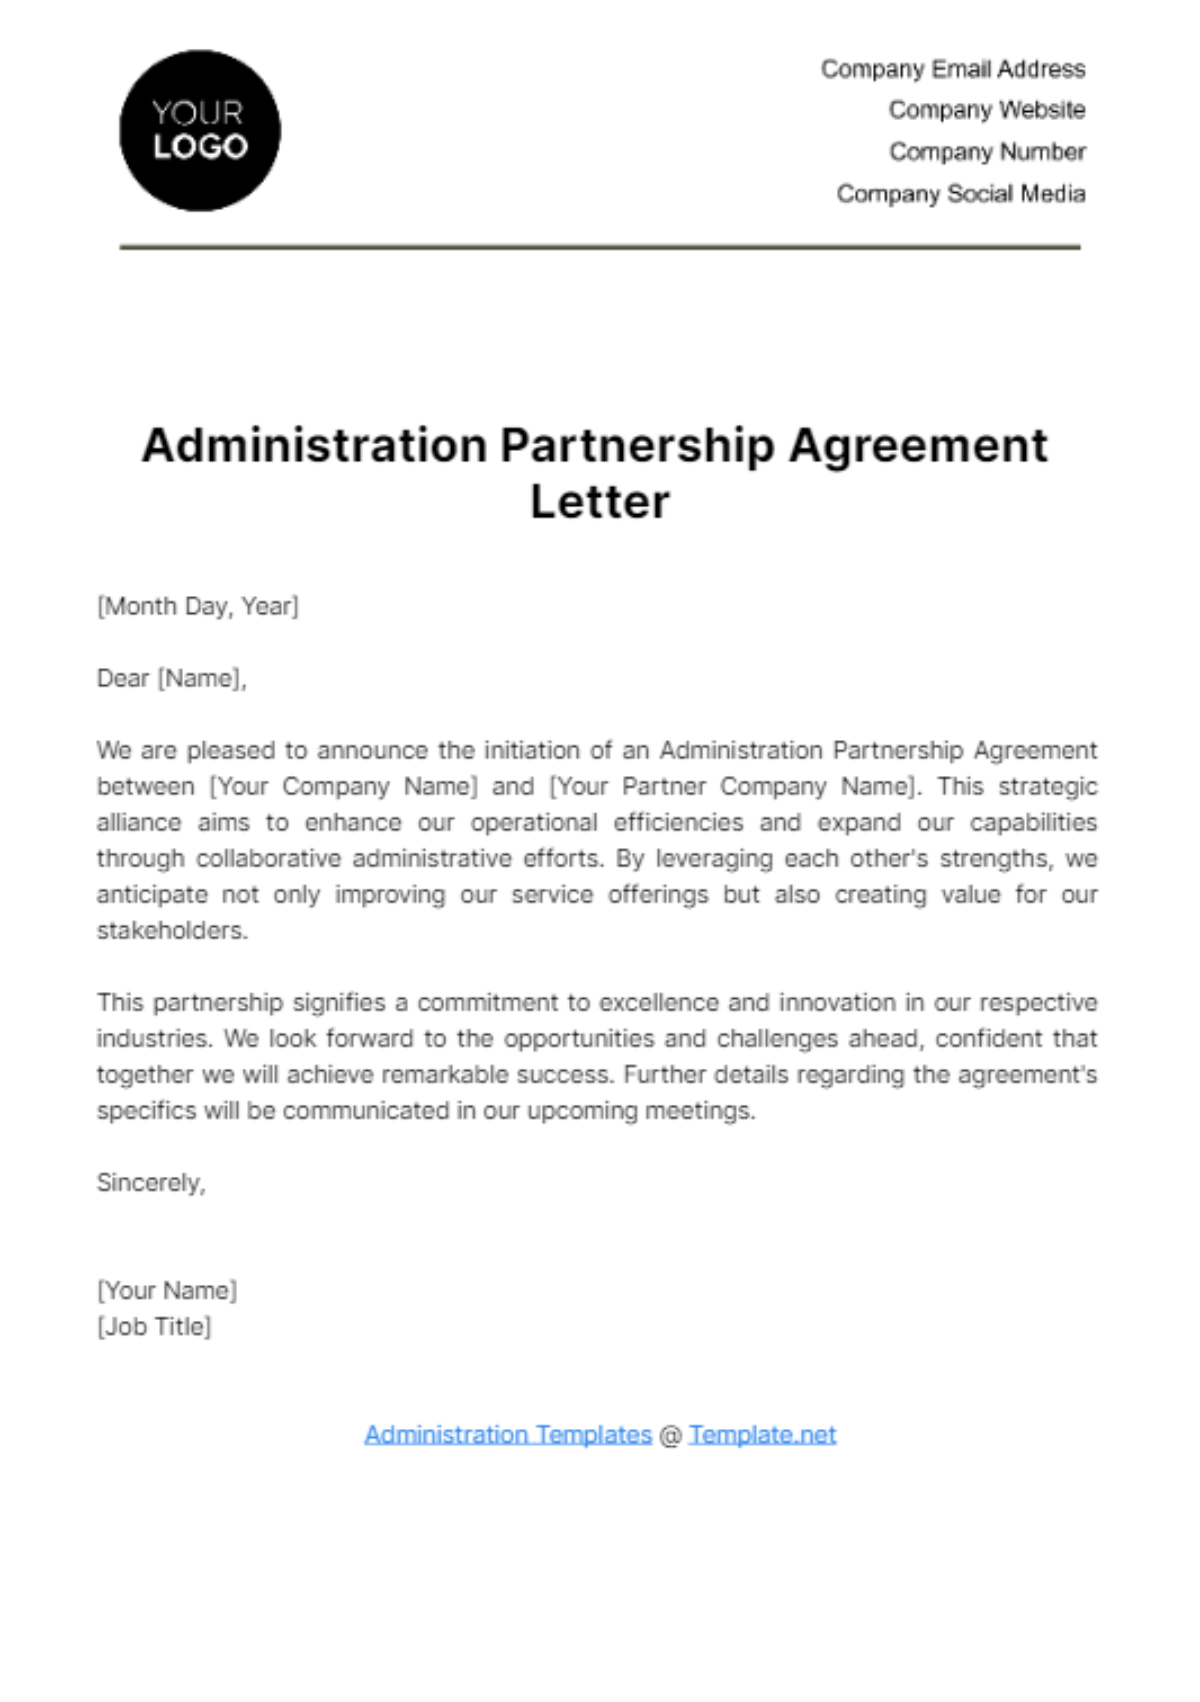 Free Administration Partnership Agreement Letter Template